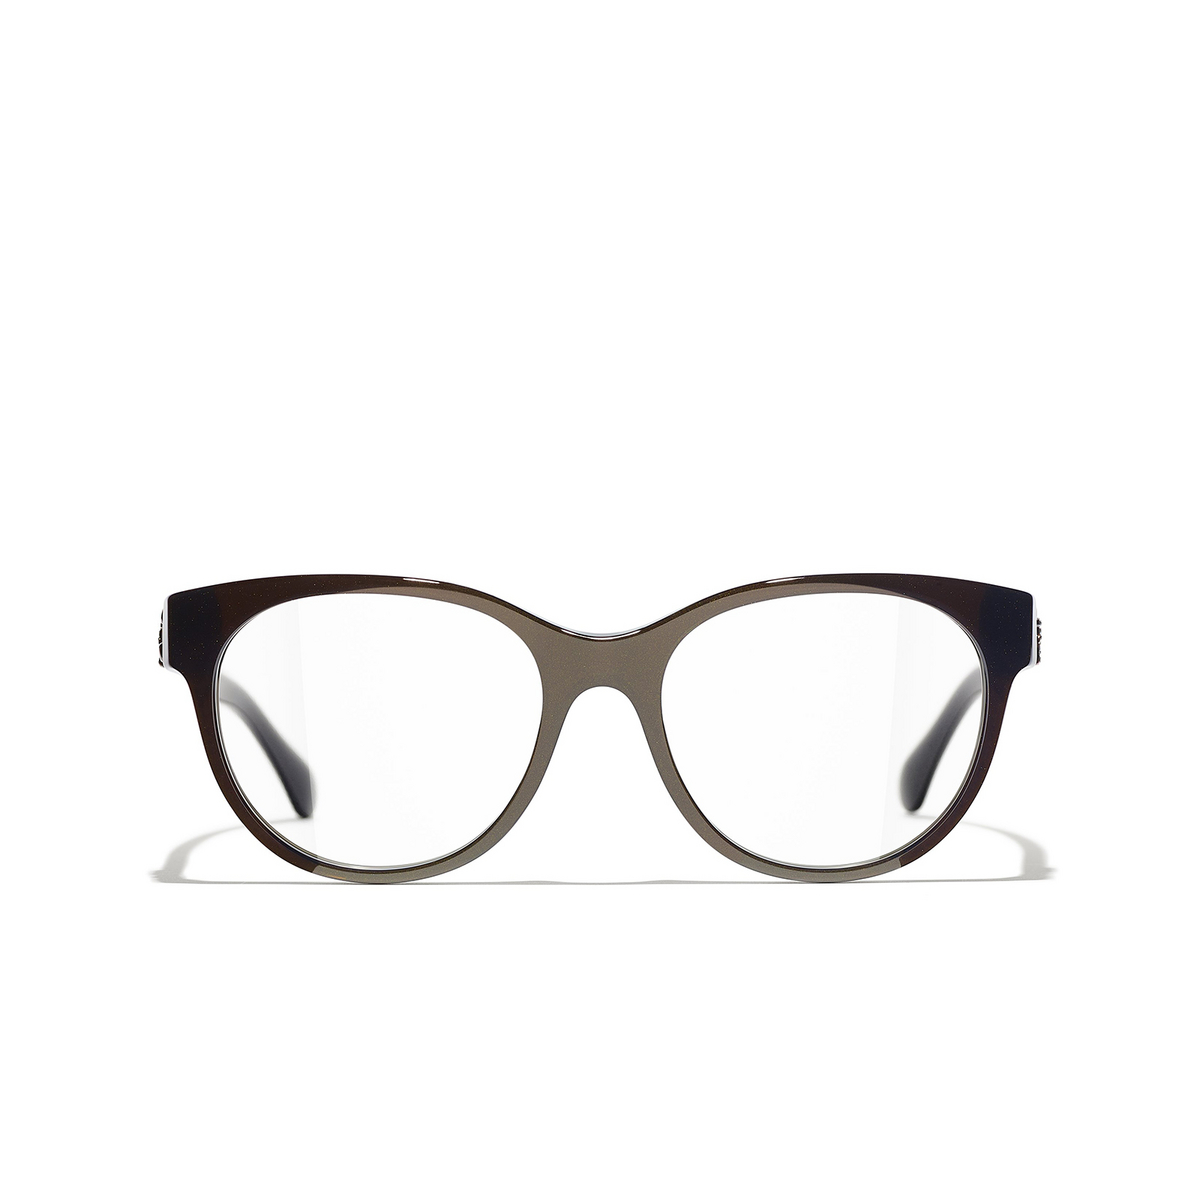 CHANEL butterfly Eyeglasses 1706 Brown - front view